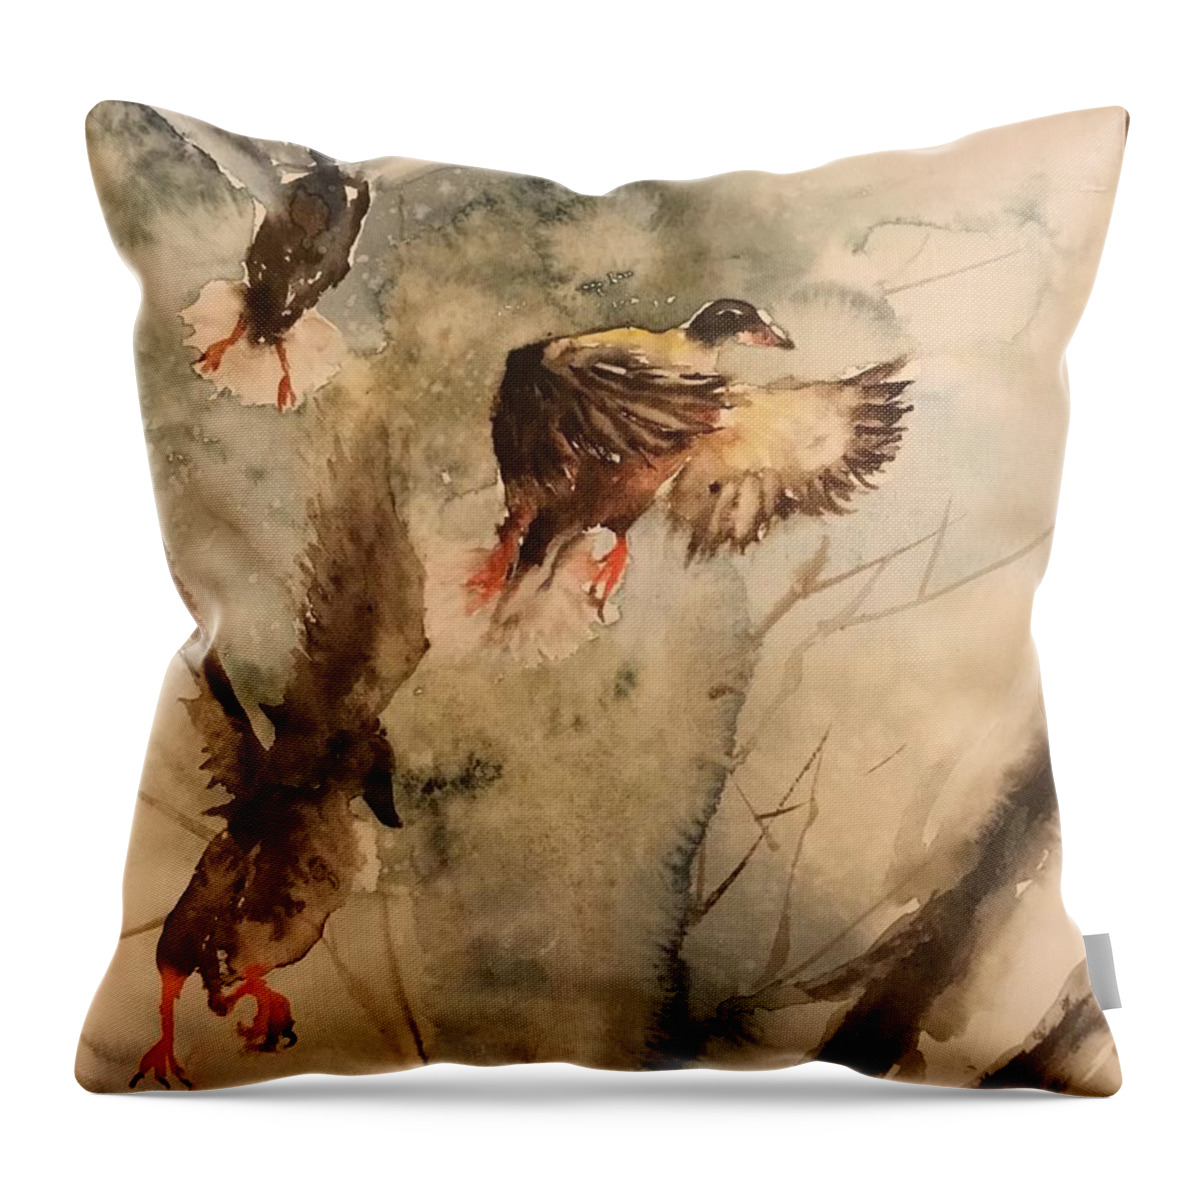 #65 2019 Throw Pillow featuring the painting #65 2019 by Han in Huang wong